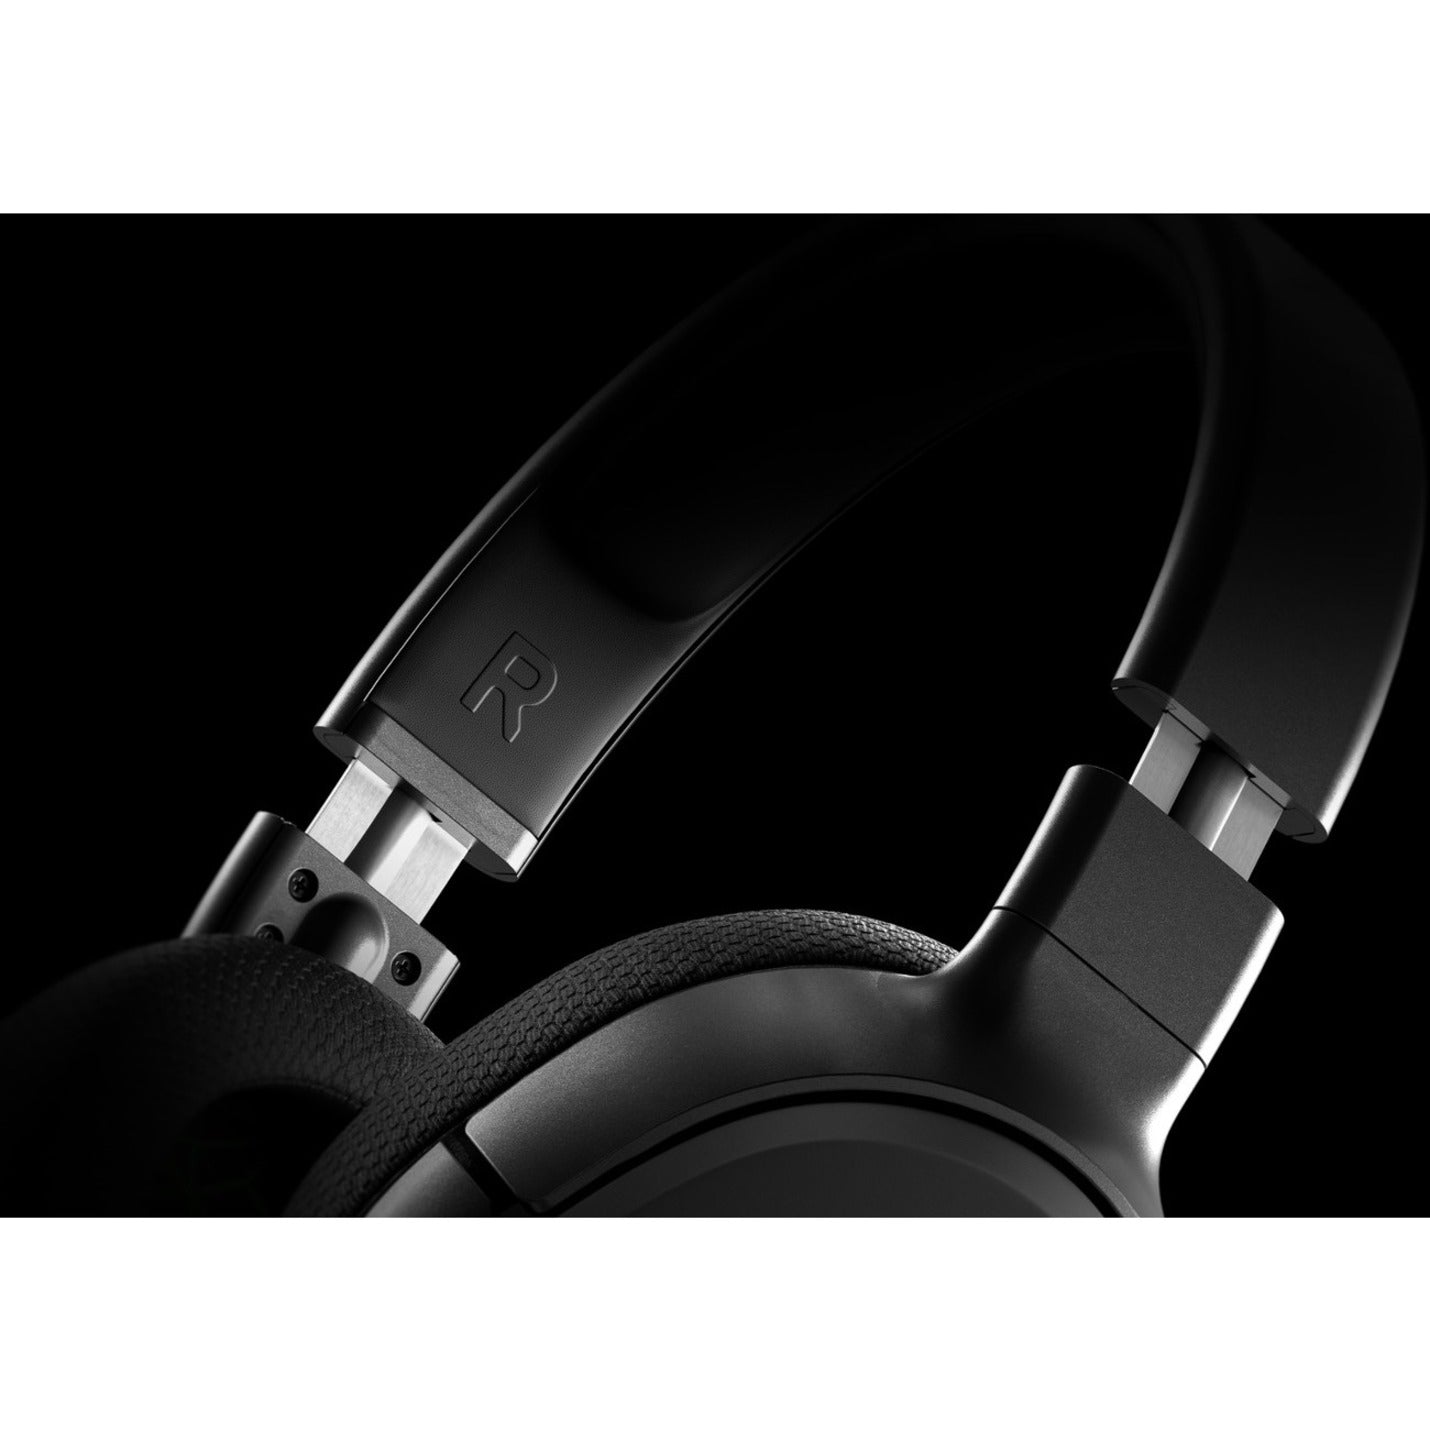 SteelSeries 61502 Arctis 1 Wireless for Xbox Headset, Binaural Over-the-head Gaming Headset [Discontinued]